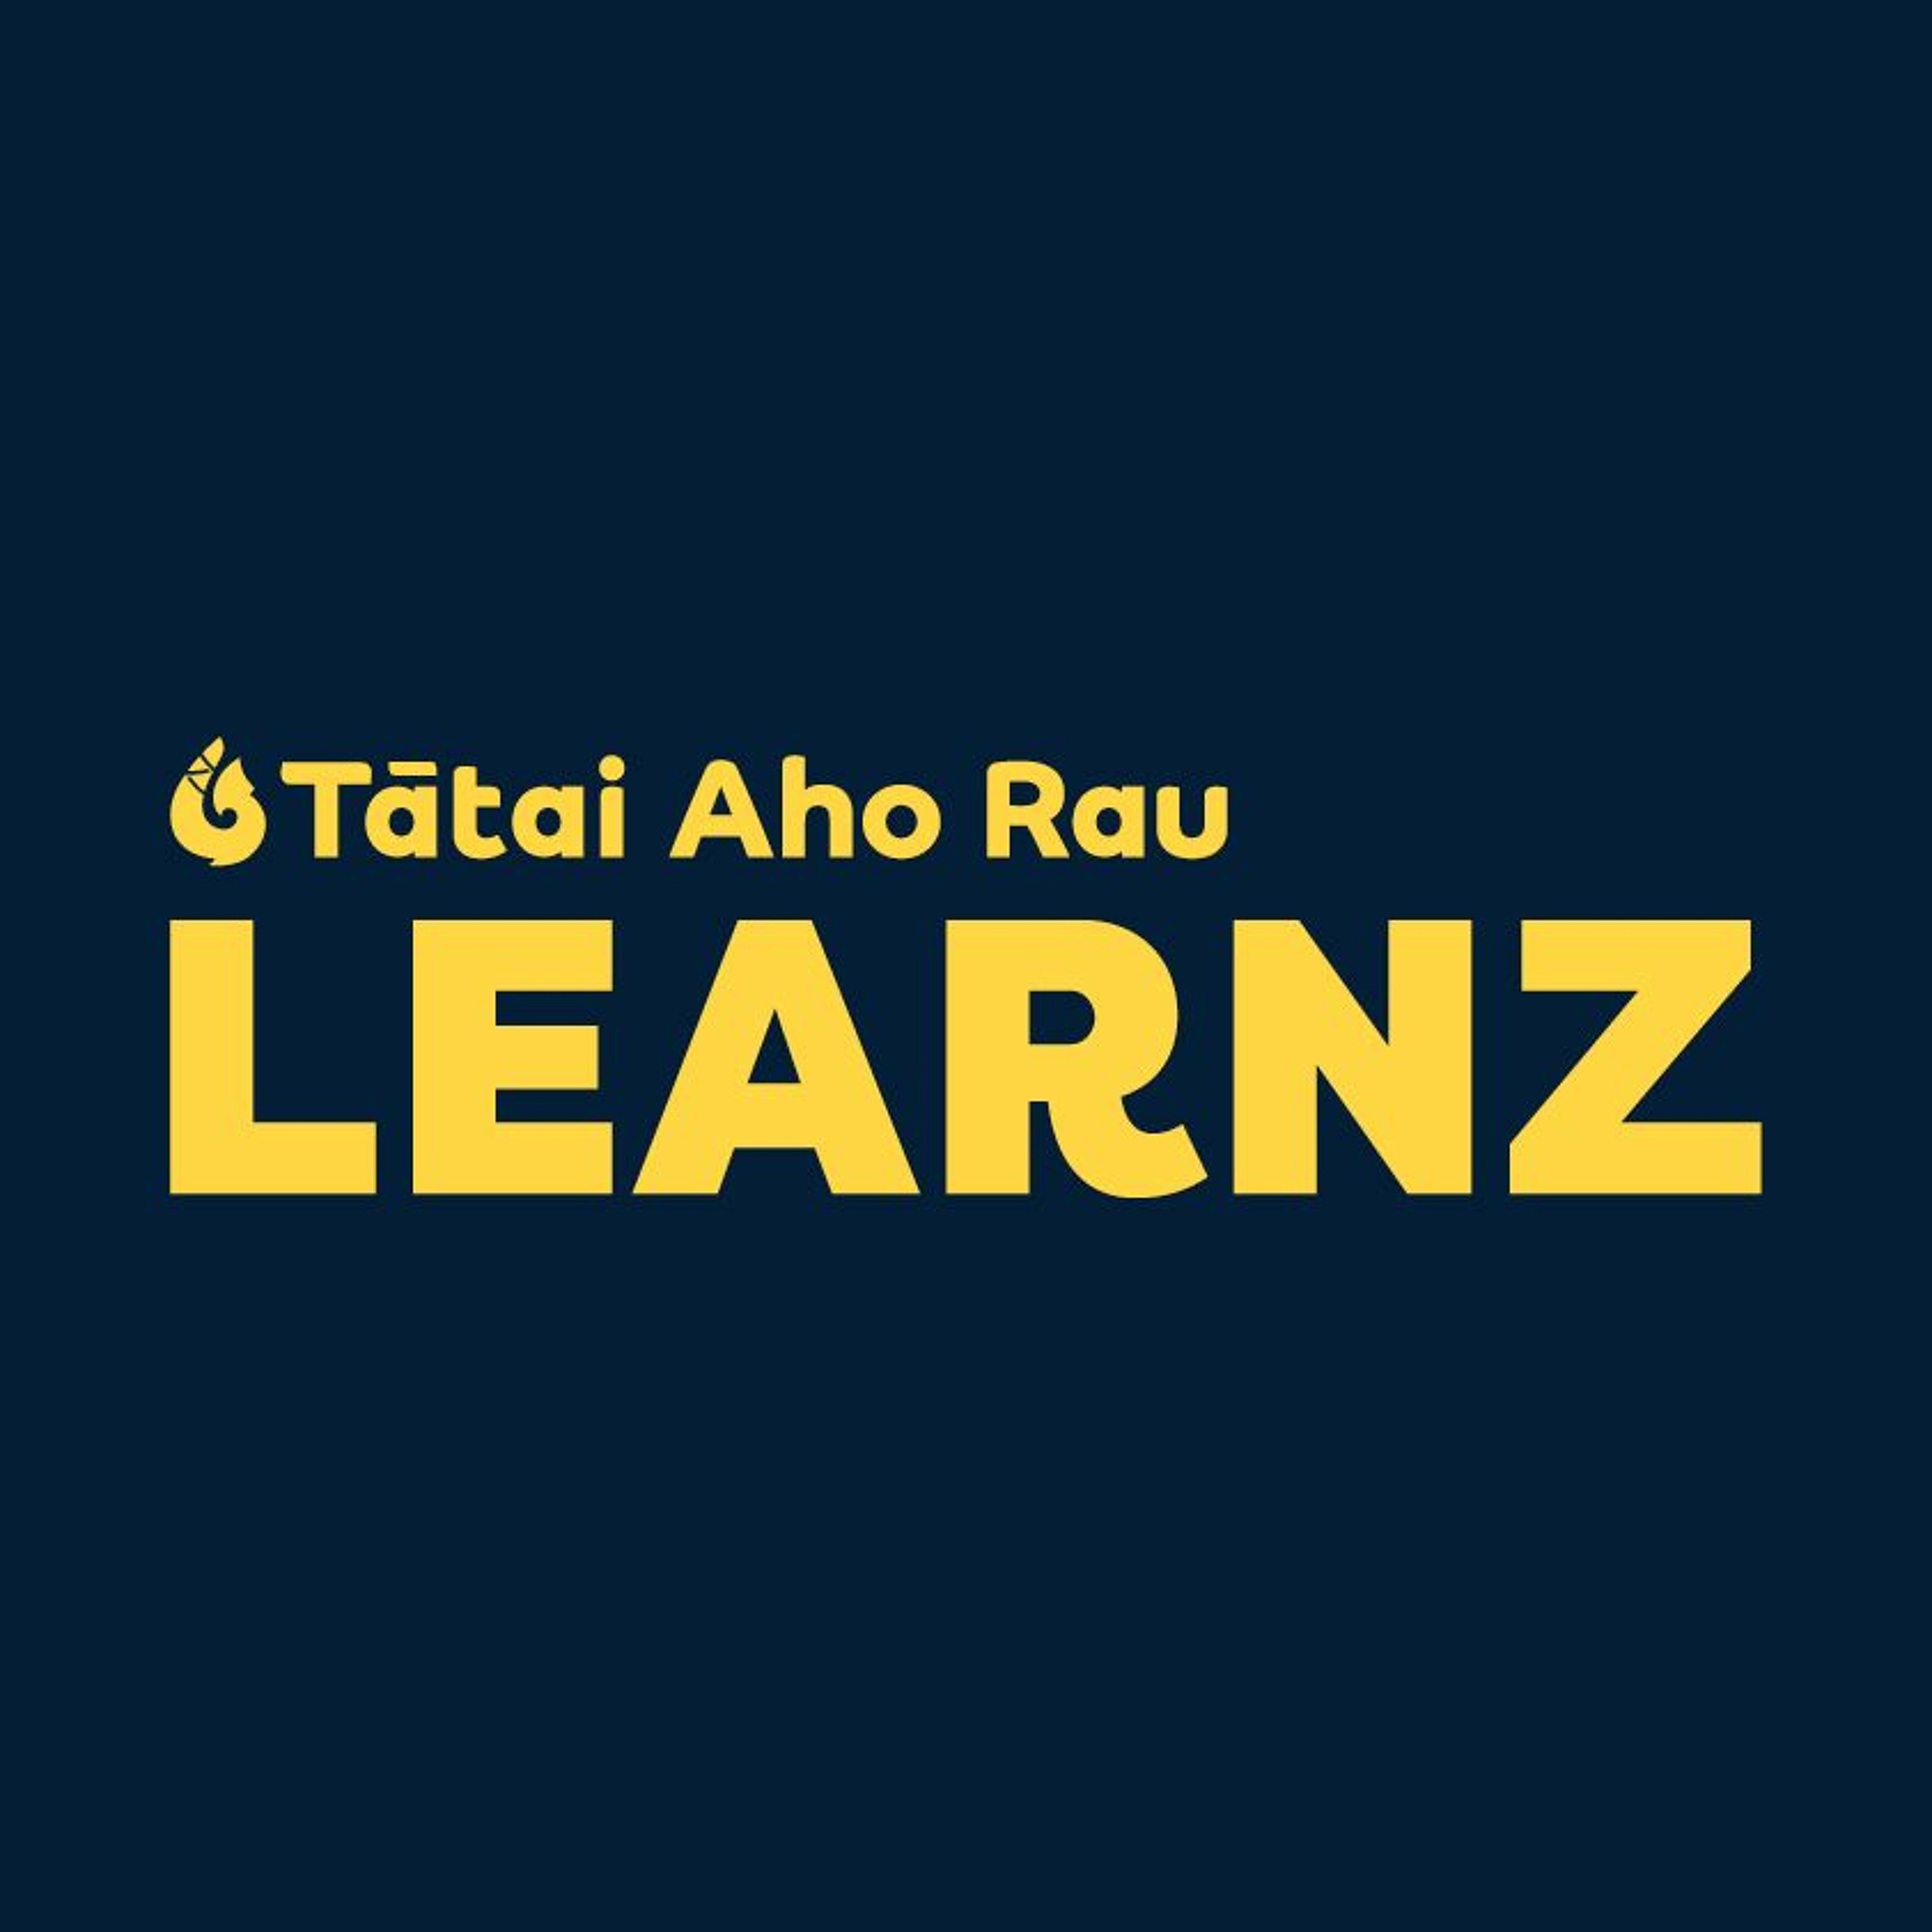 LEARNZ No more tips or dumps podcast 1 of 3